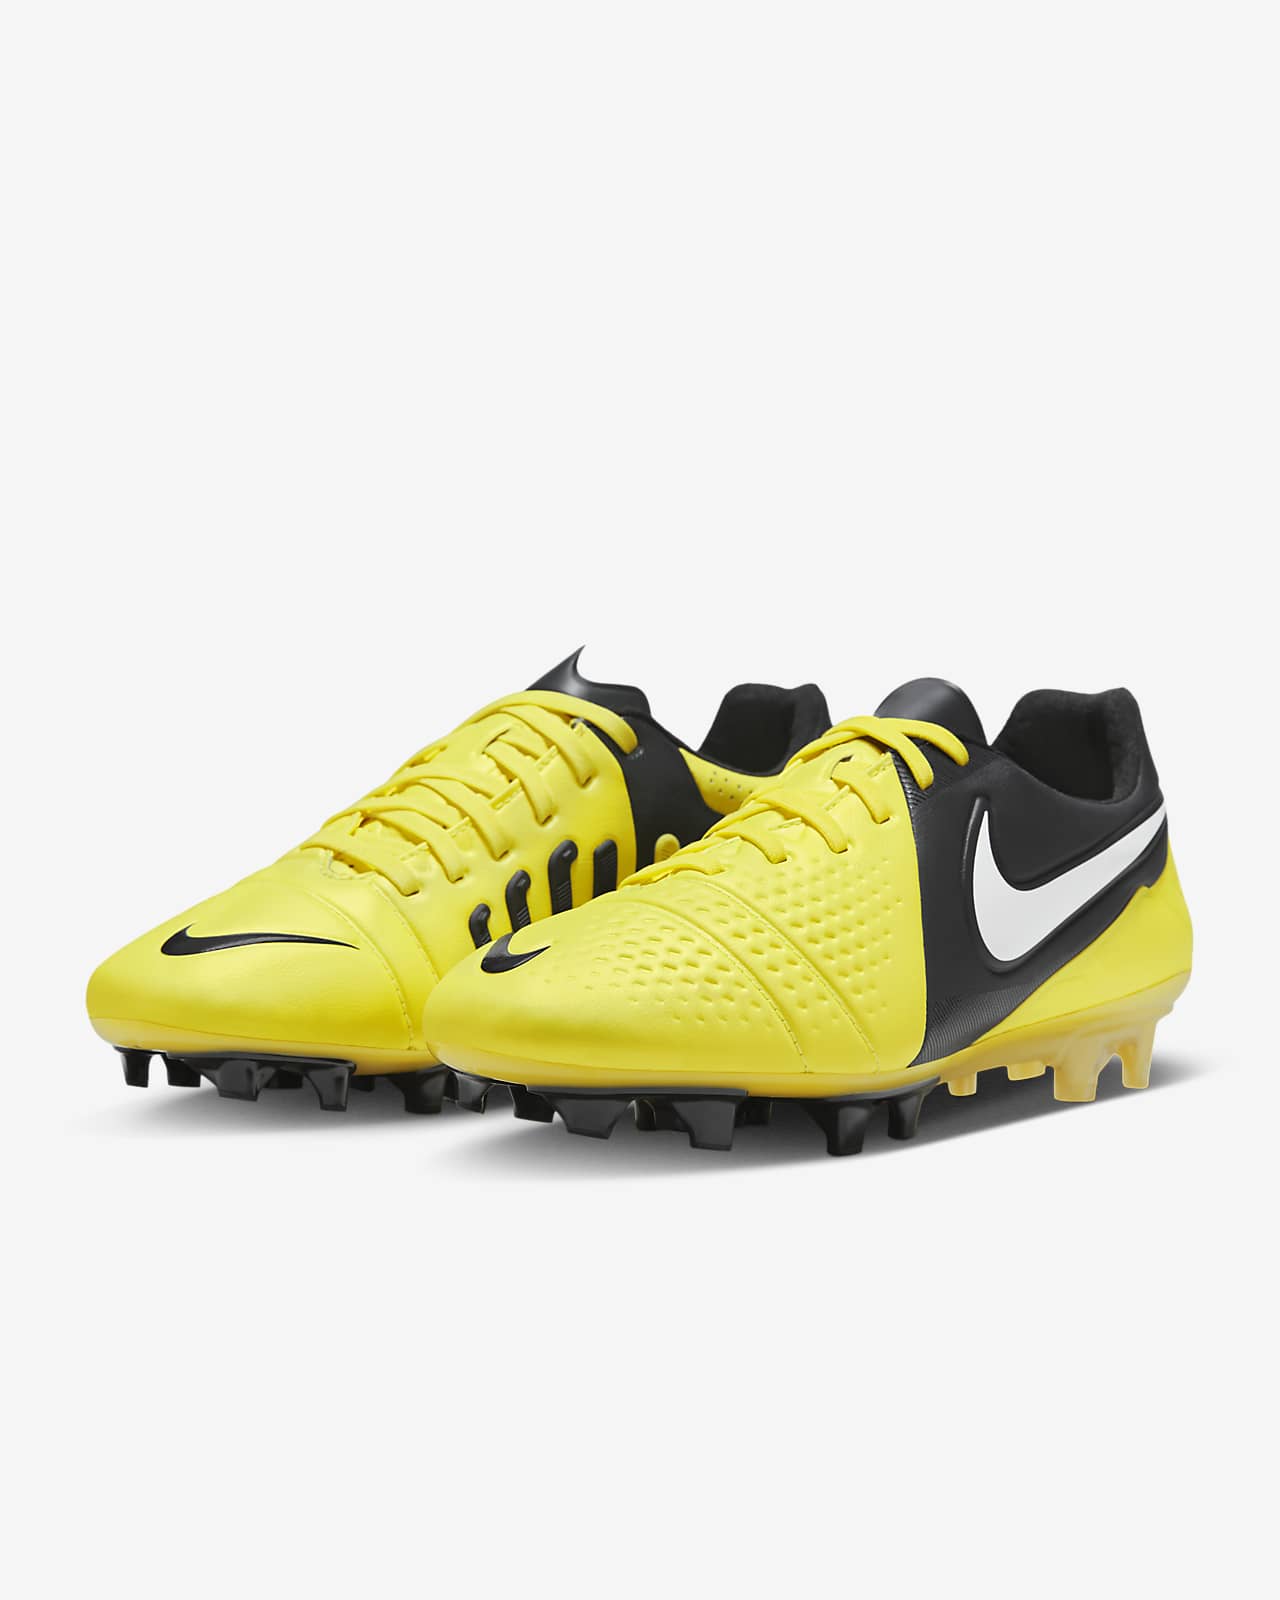 CTR360 SE Firm-Ground Football Boots. Nike LU